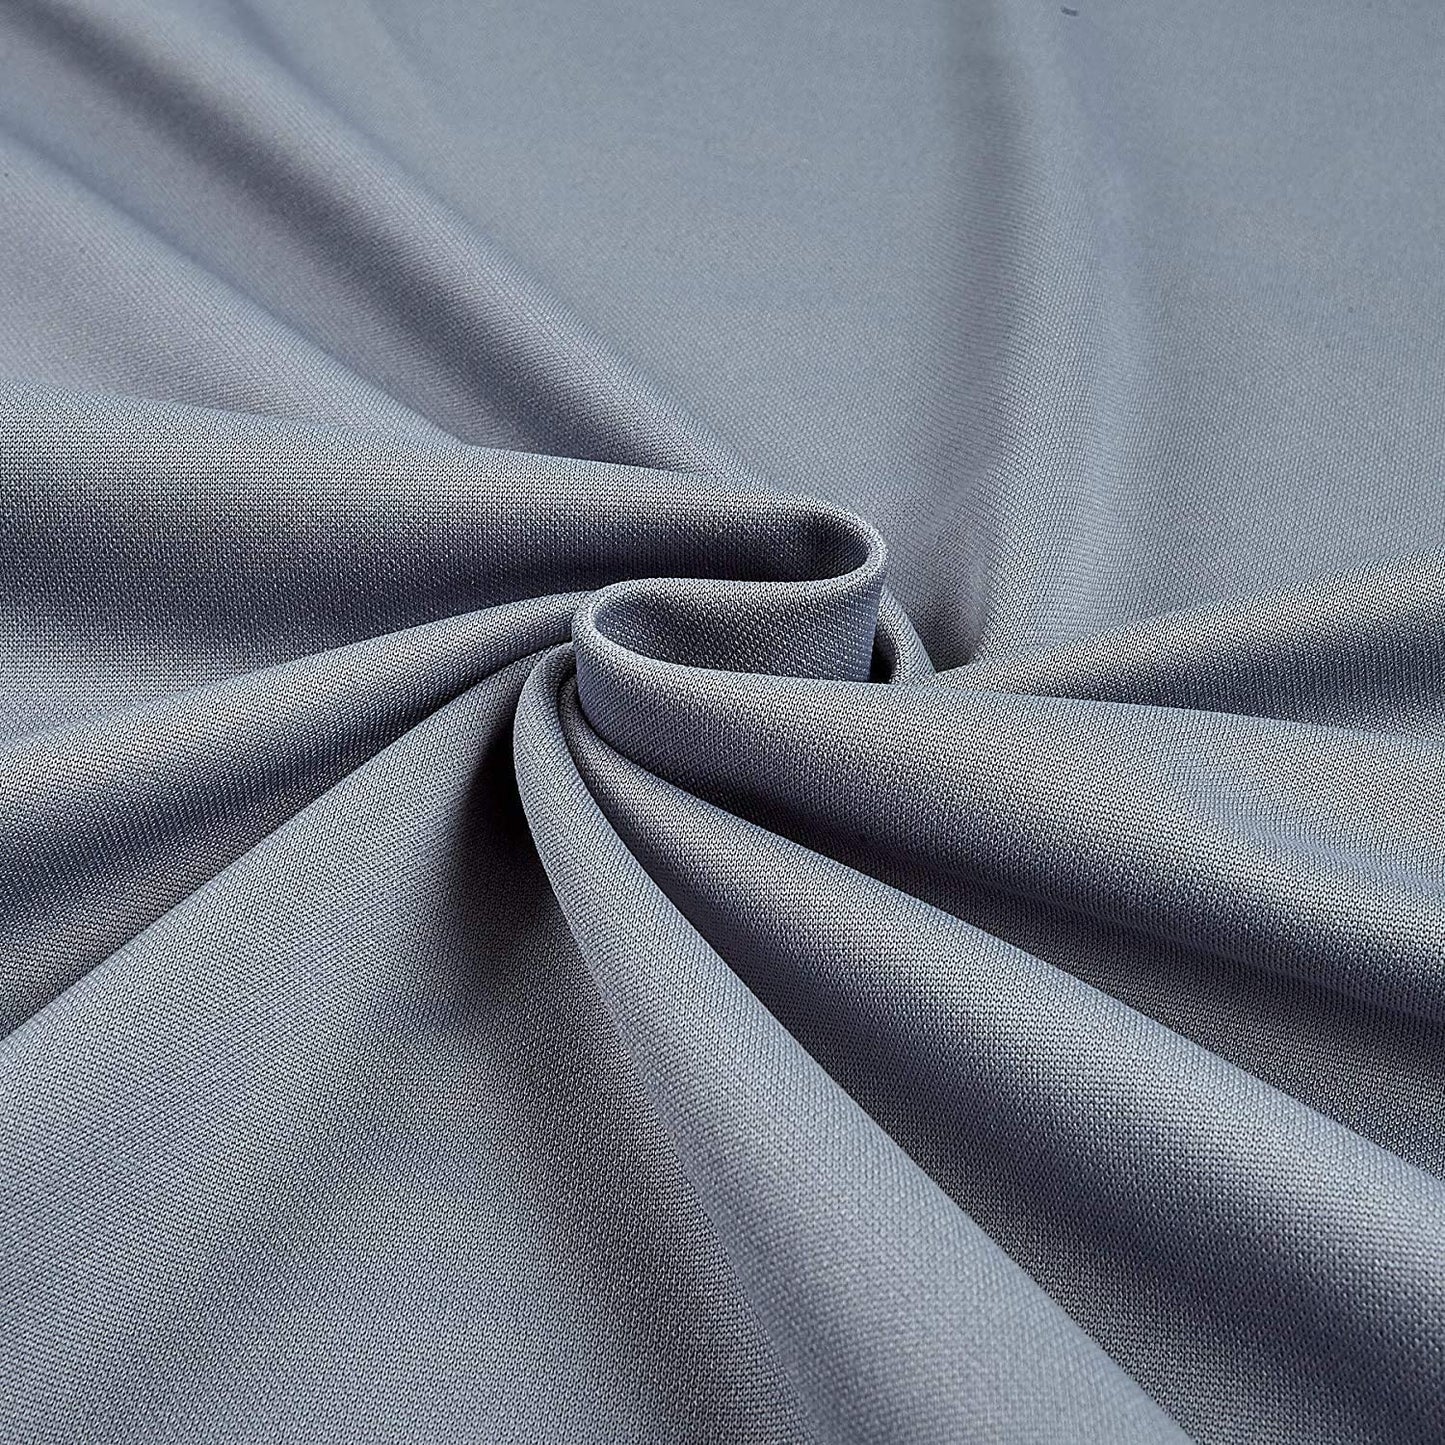 100% Polyester Wrinkle Free Stretch Double Knit Scuba Fabric (Grey, 1 Yard)